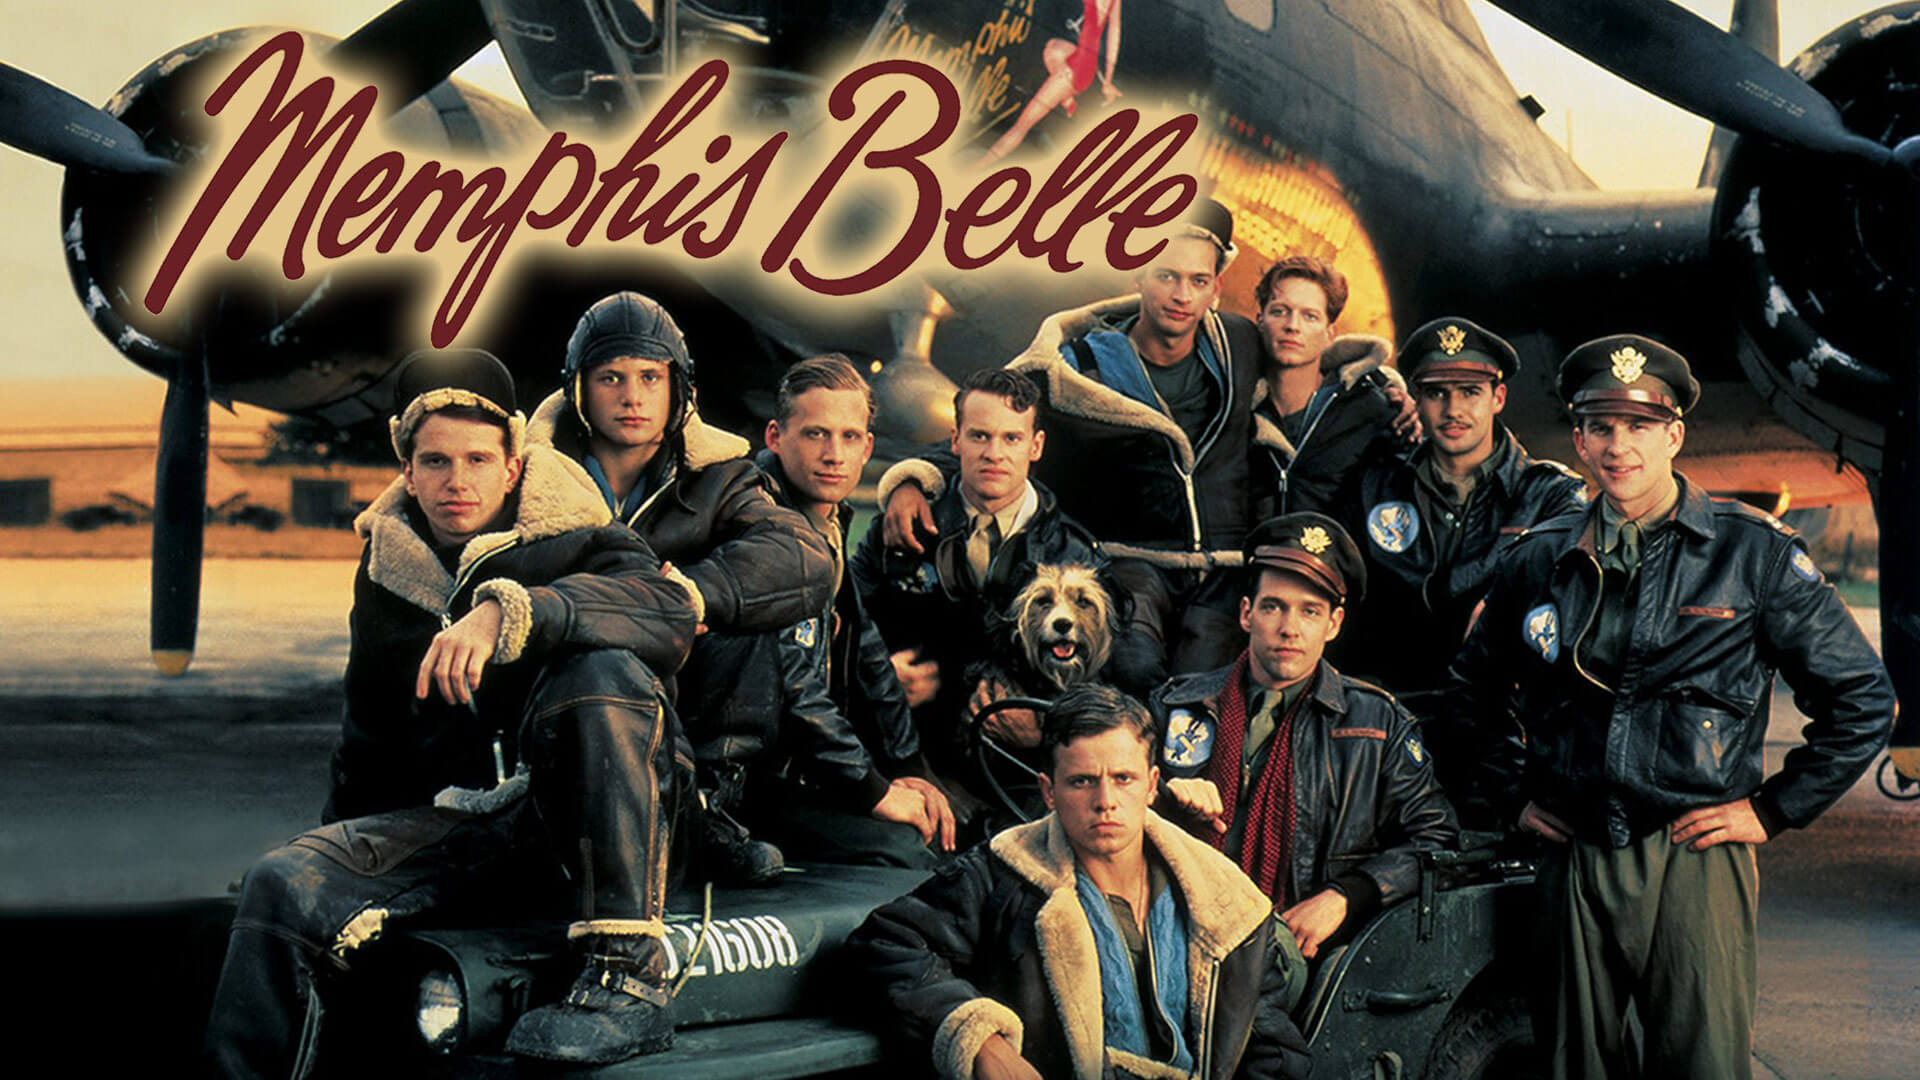 35-facts-about-the-movie-memphis-belle